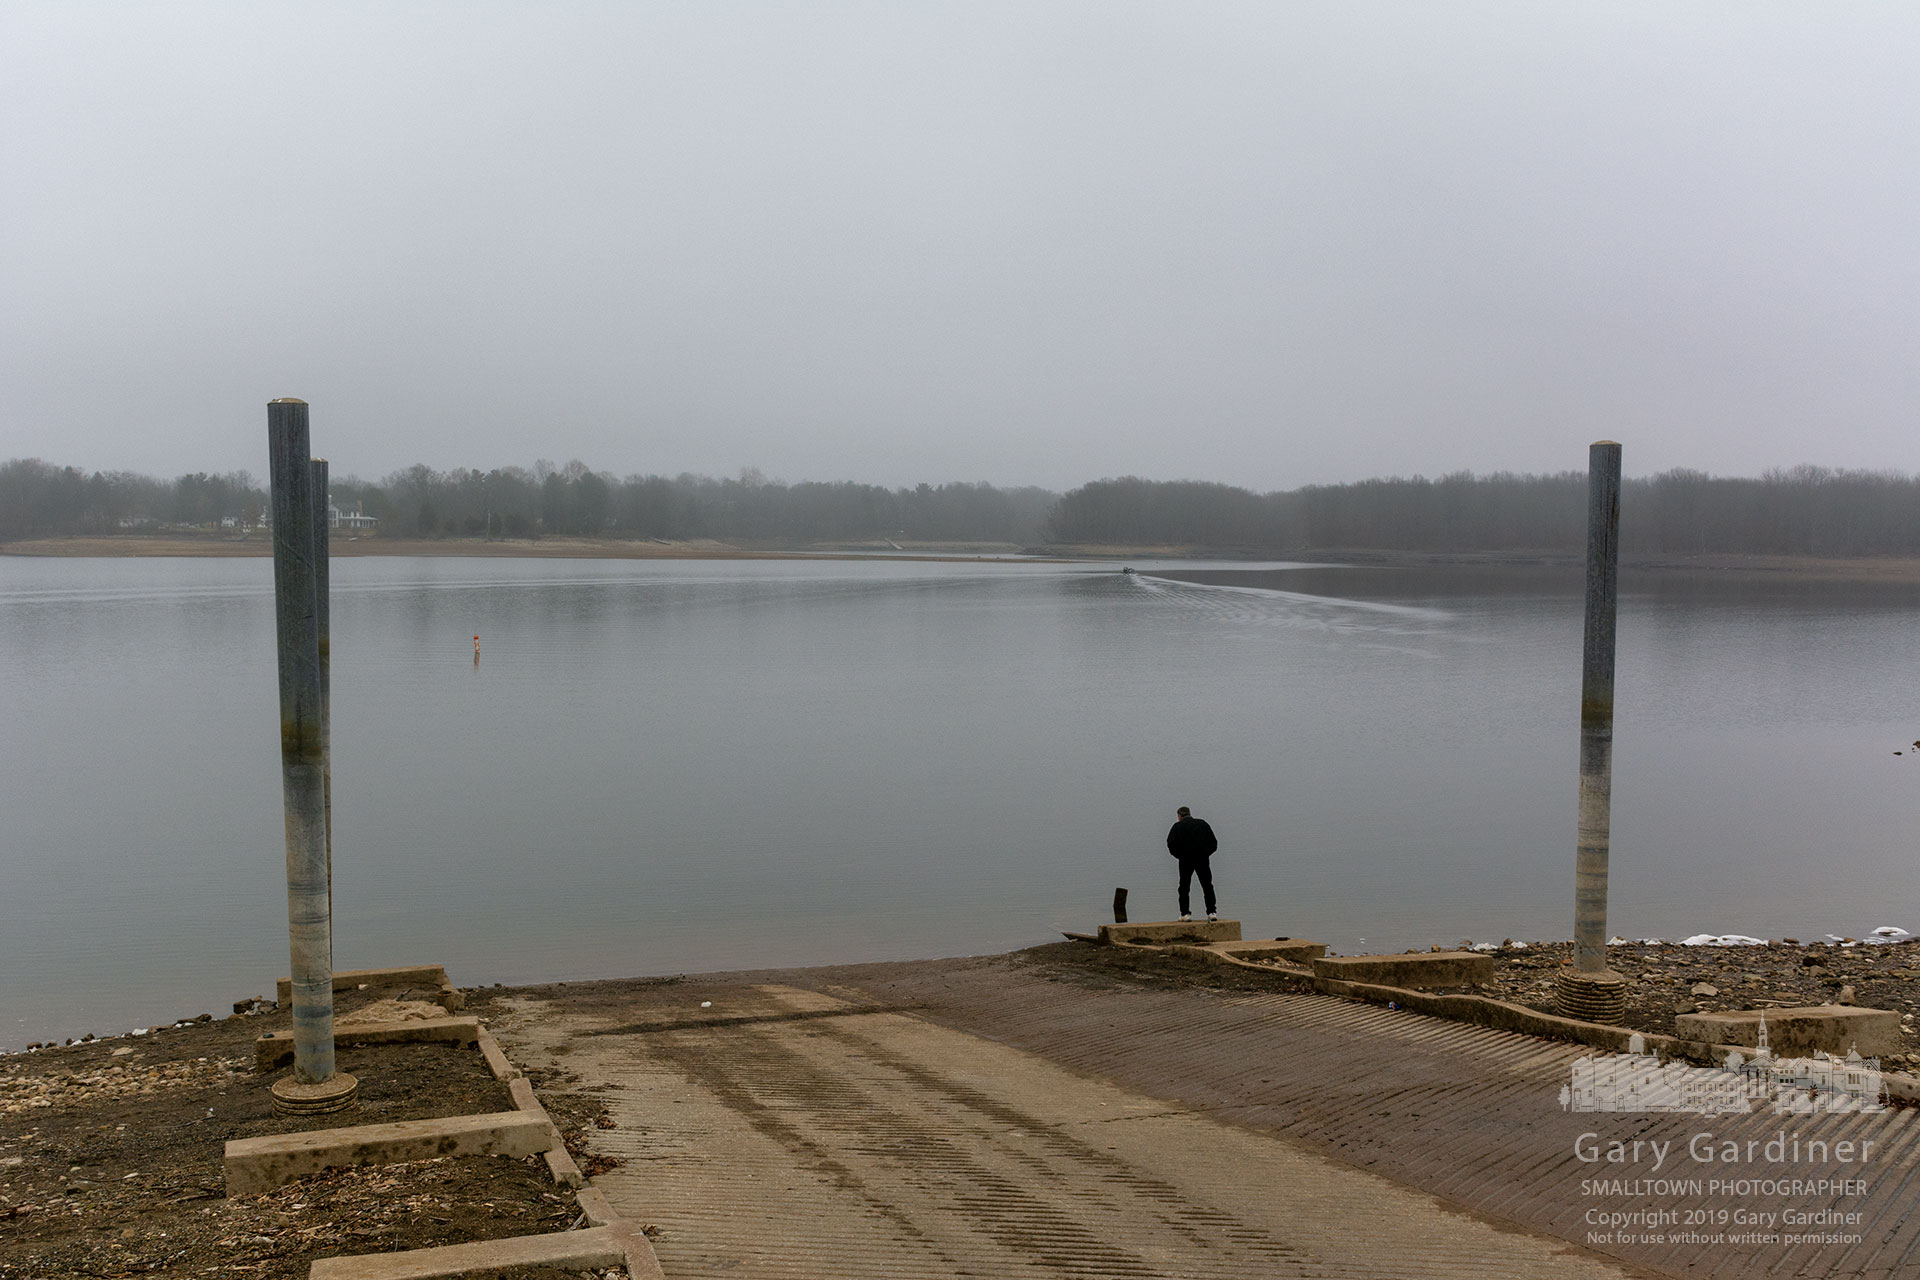 An angler checks the water level and depth at the end of the Red Bank boat ramp as he prepares himself and his gear for a day of winter fishing on the low and unfrozen water at Hoover Reservoir. My Final Photo for Dec. 28, 2019.